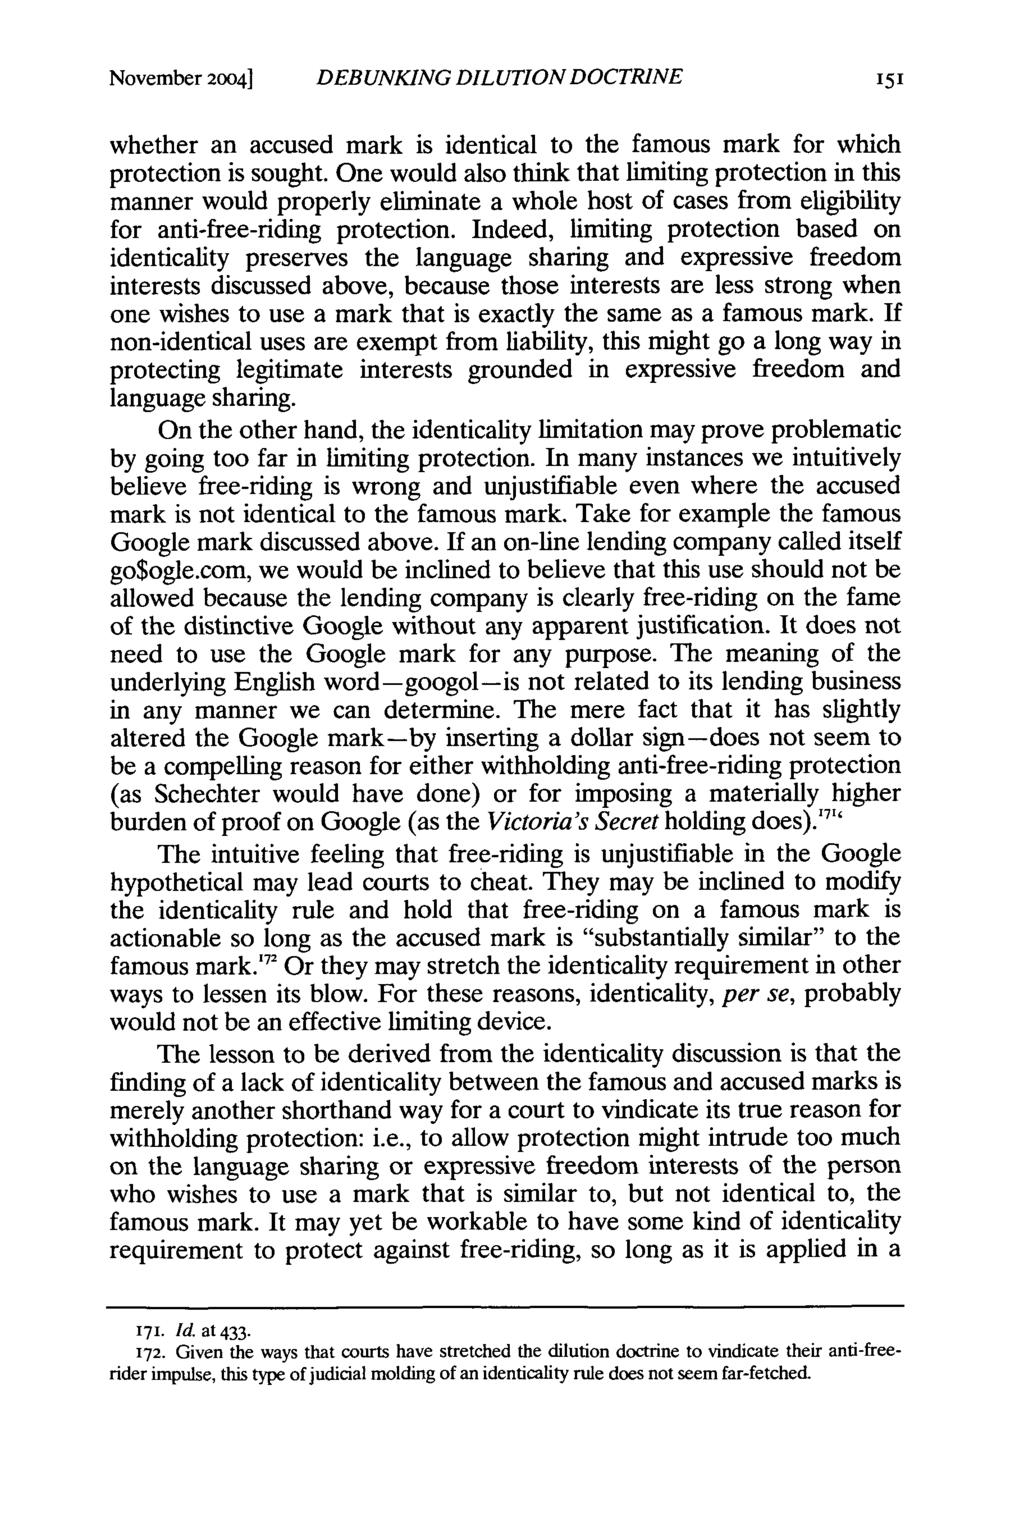 November 20041 DEBUNKING DILUTION DOCTRINE whether an accused mark is identical to the famous mark for which protection is sought.